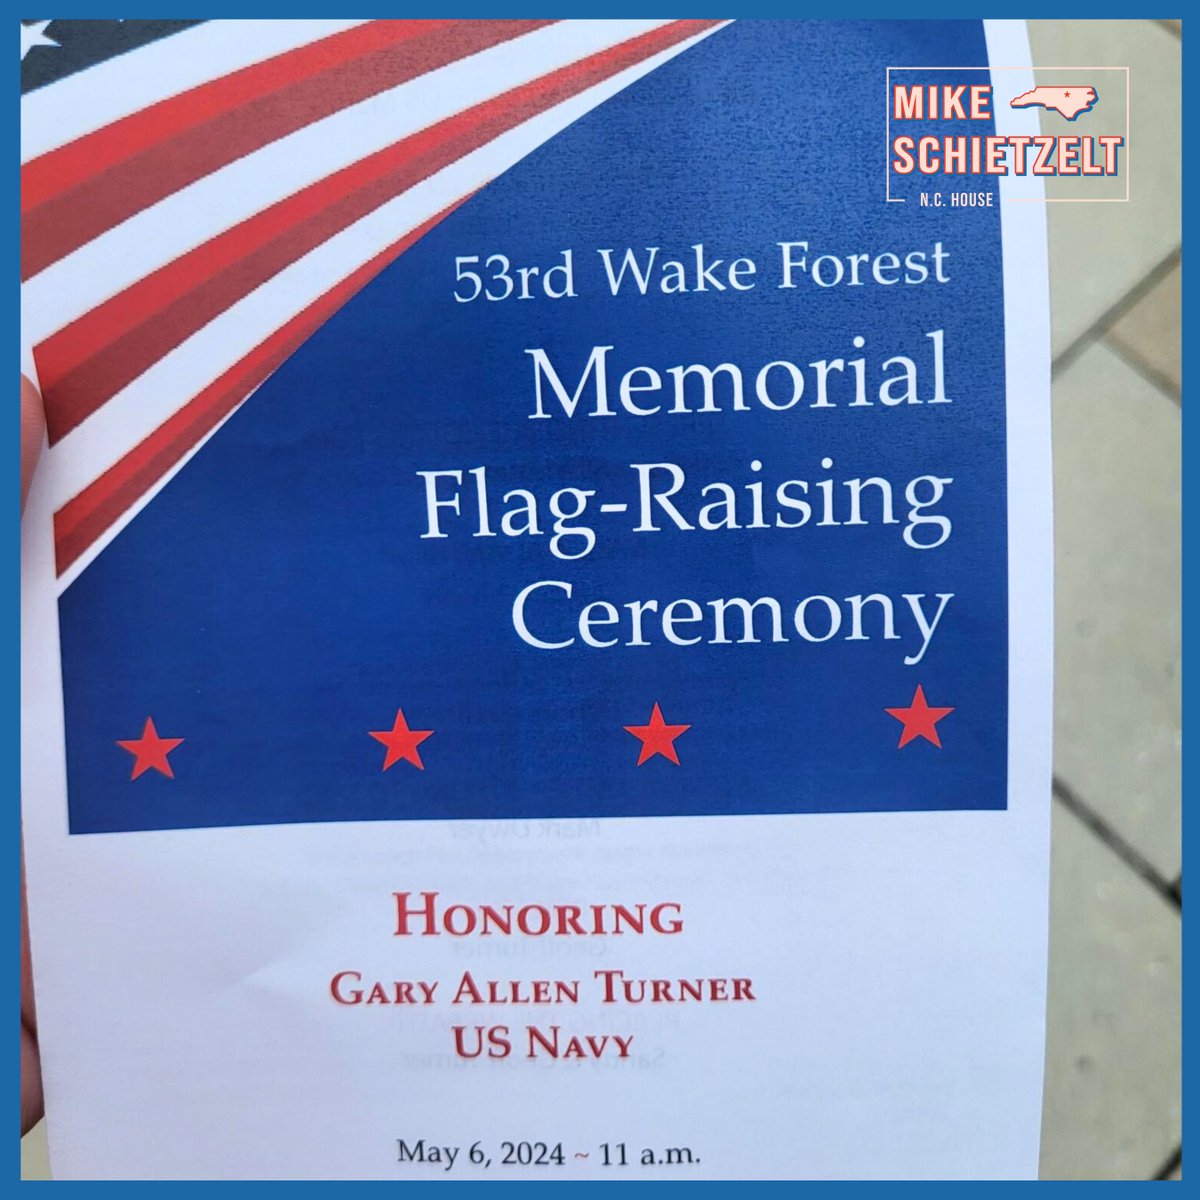 This morning, the Town of Wake Forest honored the service and sacrifice of Gary Allen Turner. I am so grateful to the Turner family for allowing us to honor Gary and I'm glad to live in a Town that honors its veterans. #ncpol #HD35